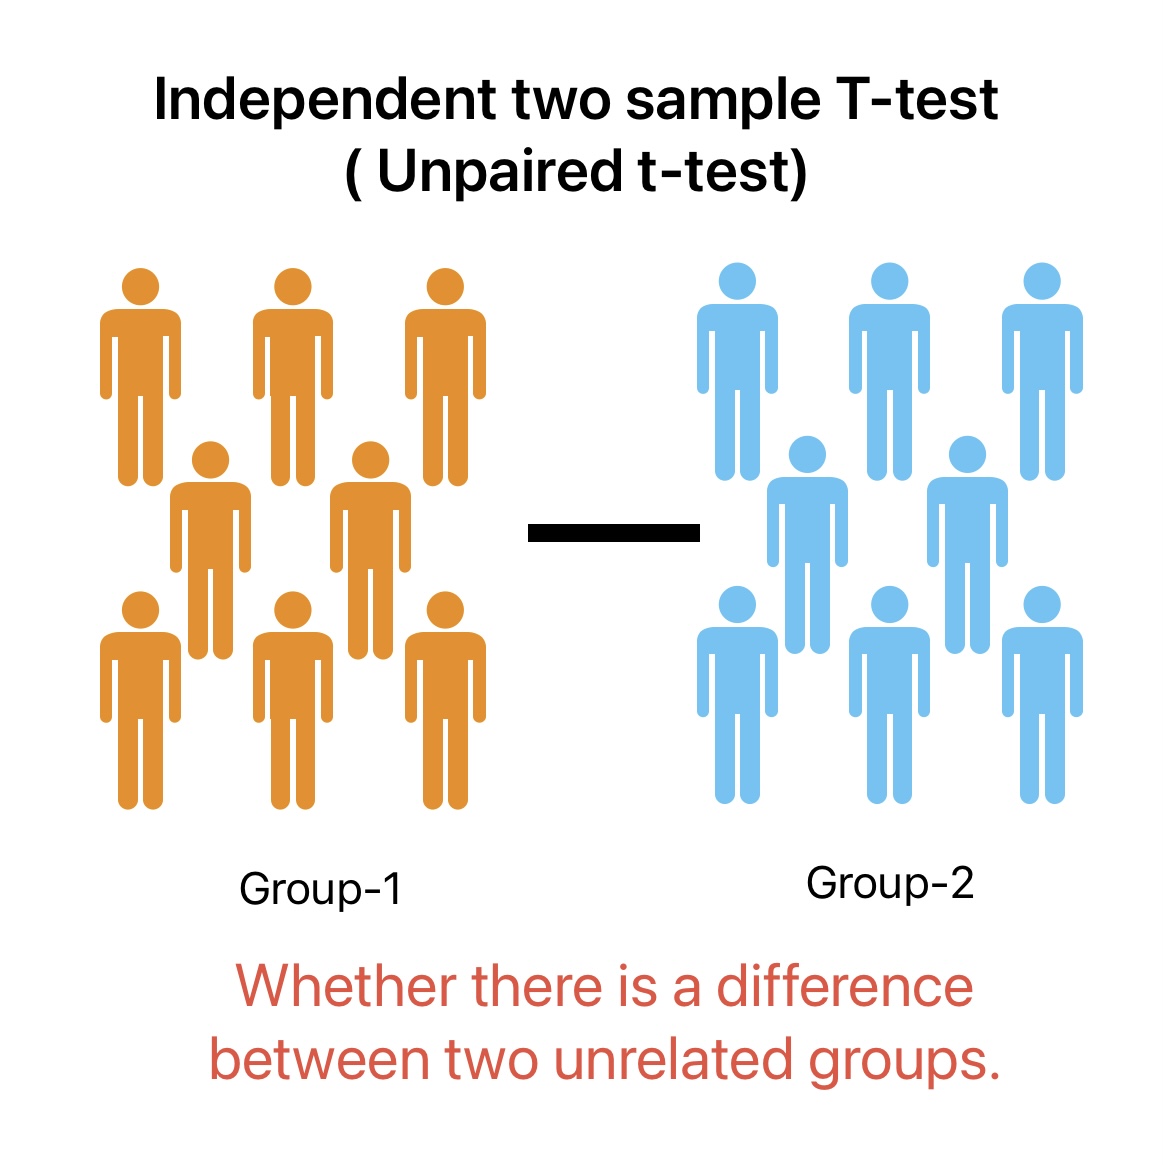 This image shows Independent two sample t-test representation